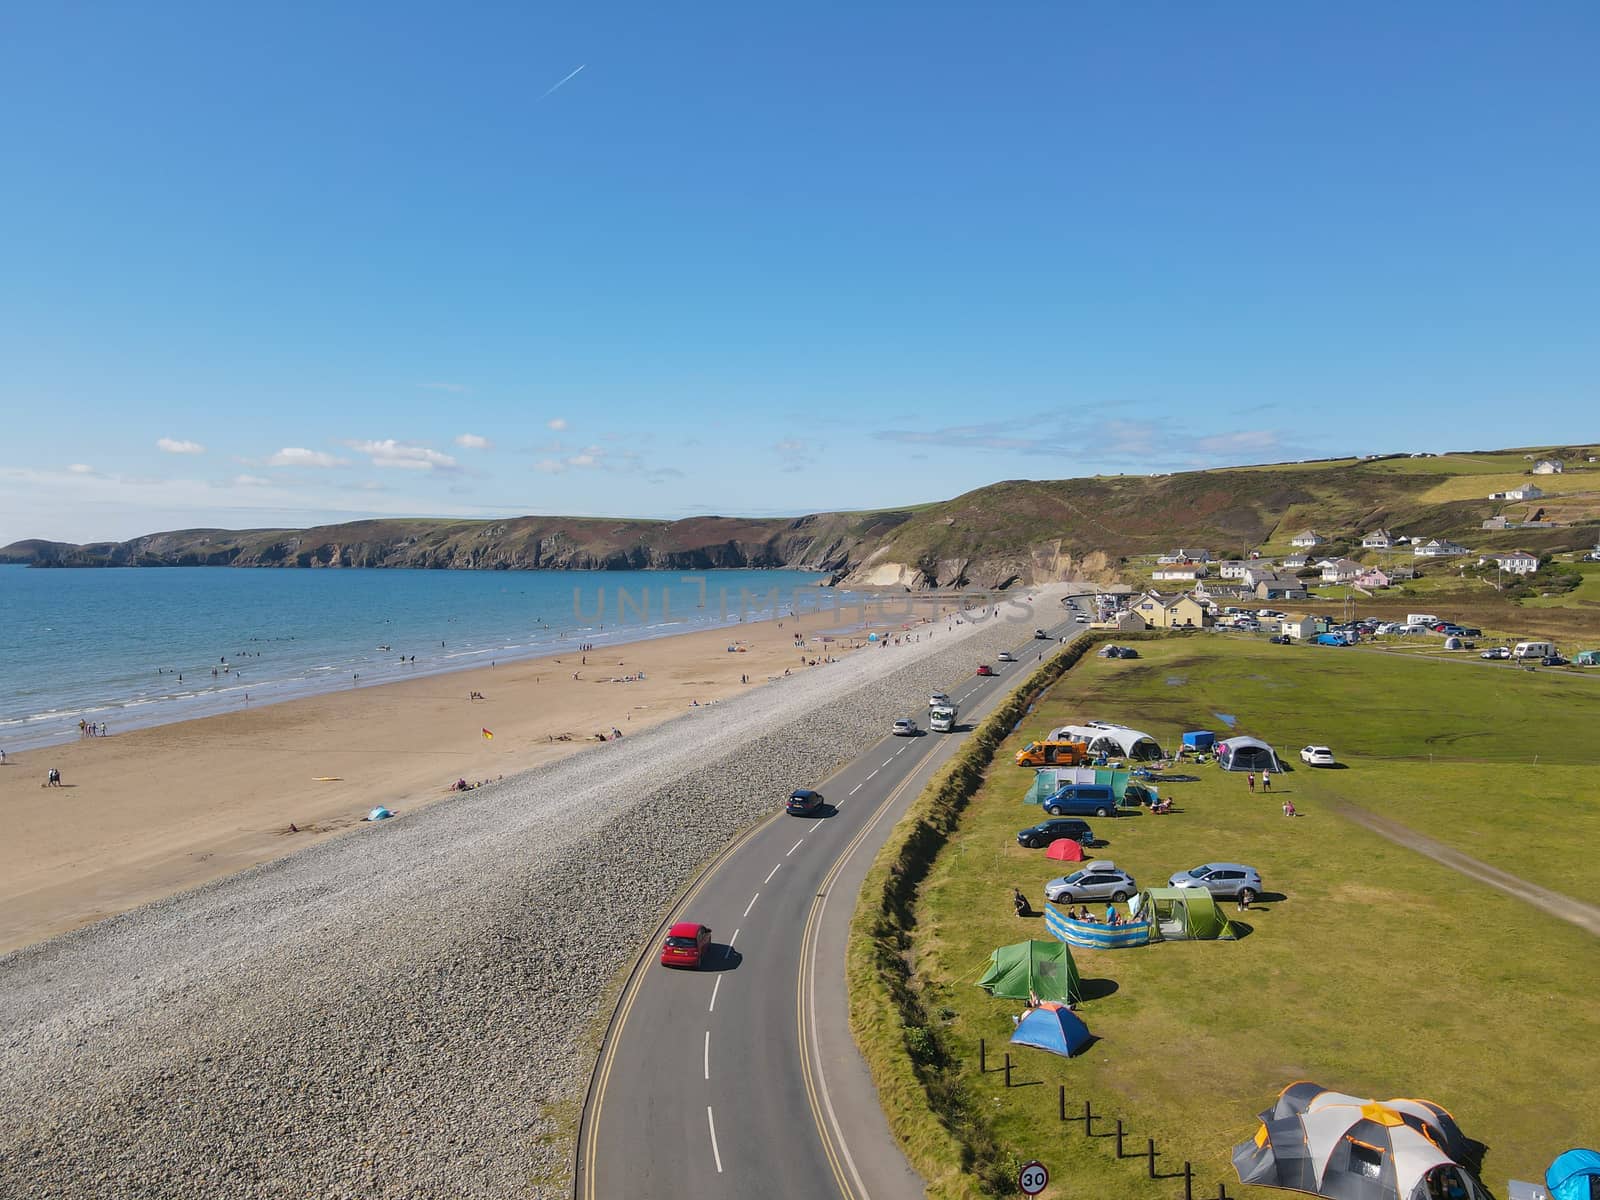 Newgale Beach In Pembrokeshire Is A Huge Sandy Beach Backed With A Pebble Embankment by WCLUK